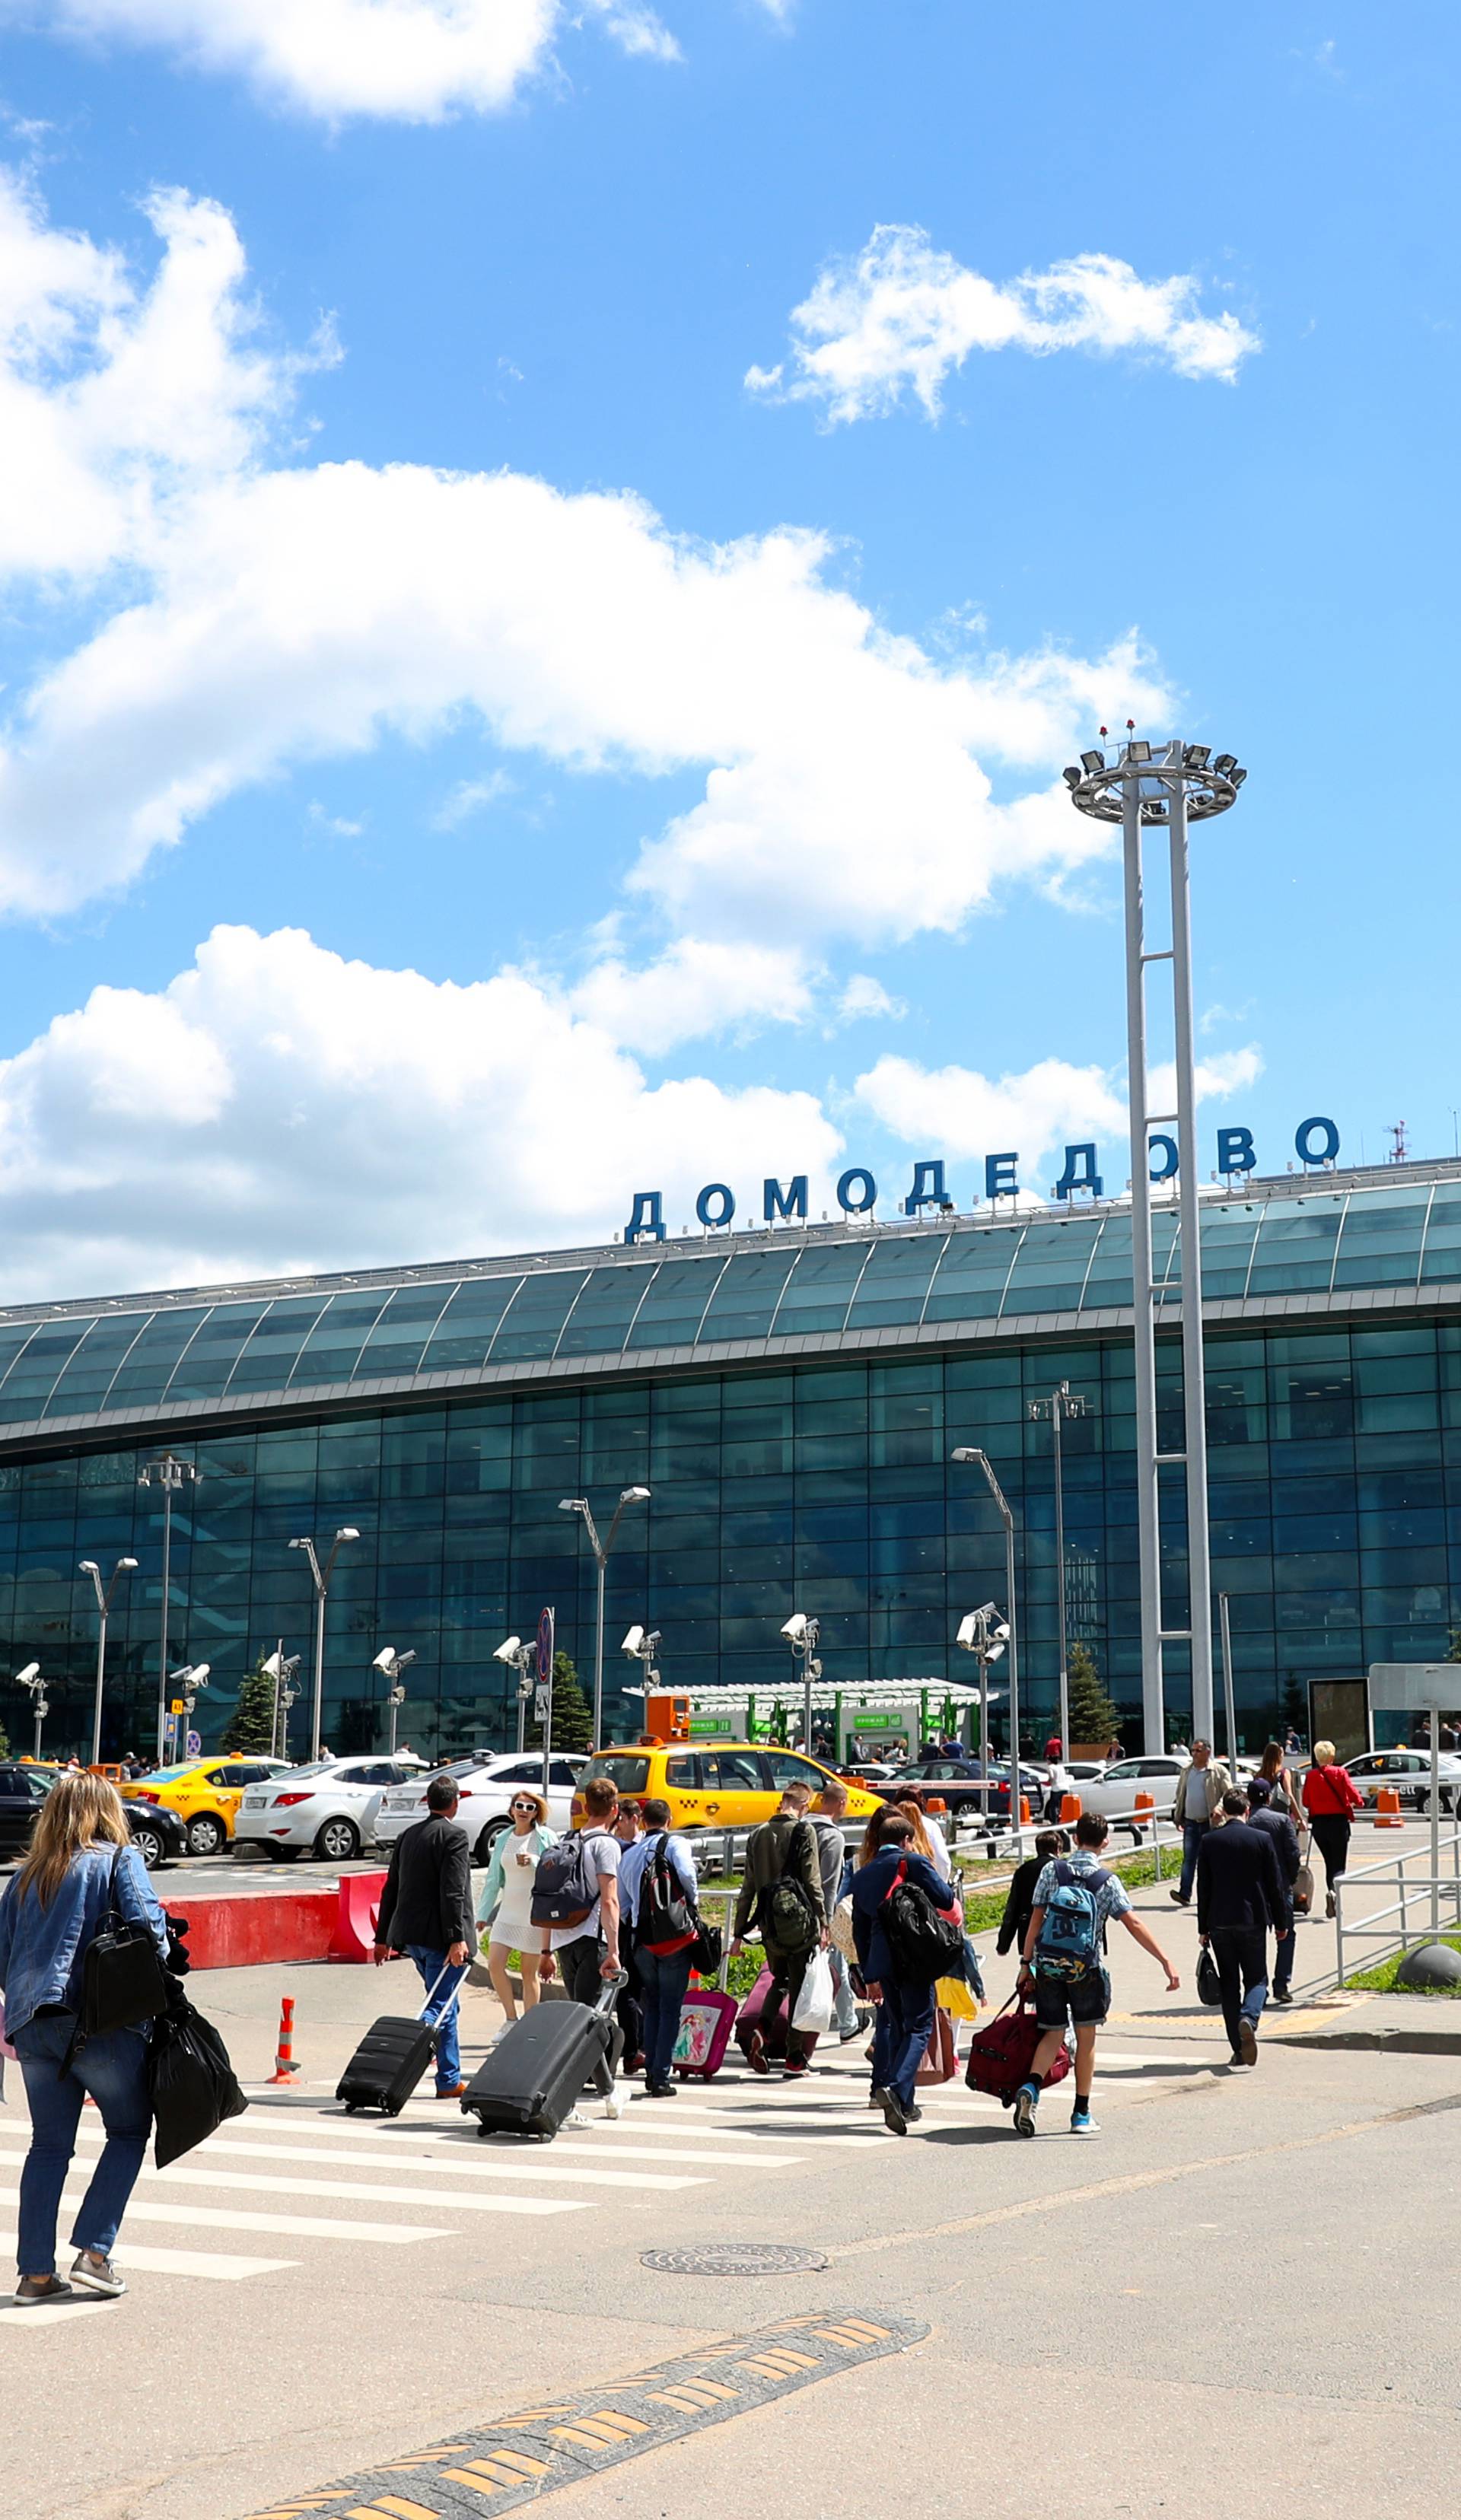 FIFA Confederations Cup - Moscow Travel Stock